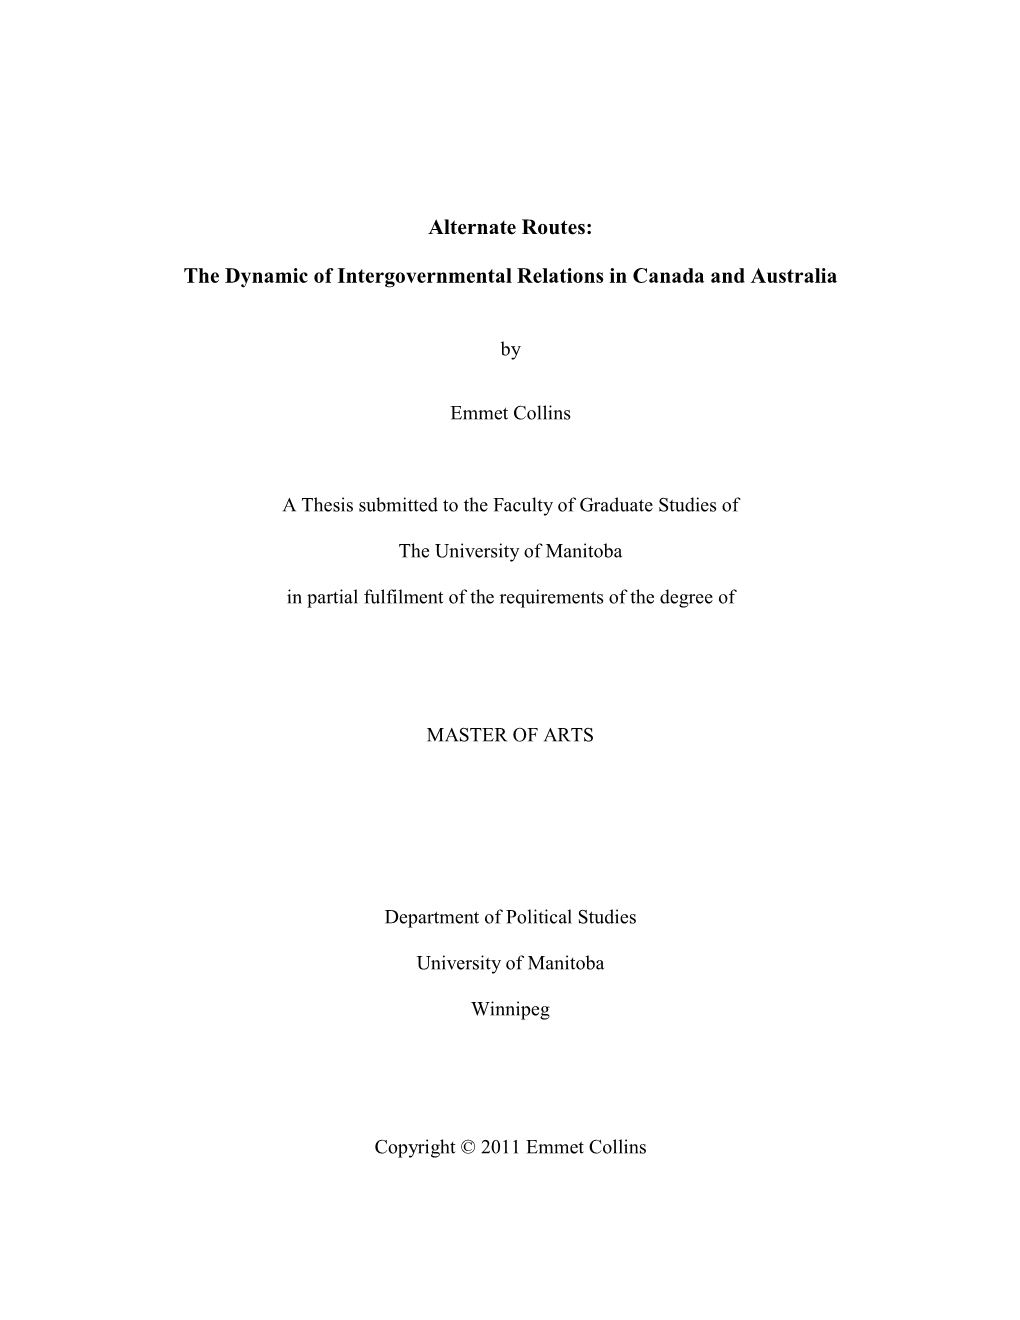 The Dynamic of Intergovernmental Relations in Canada and Australia